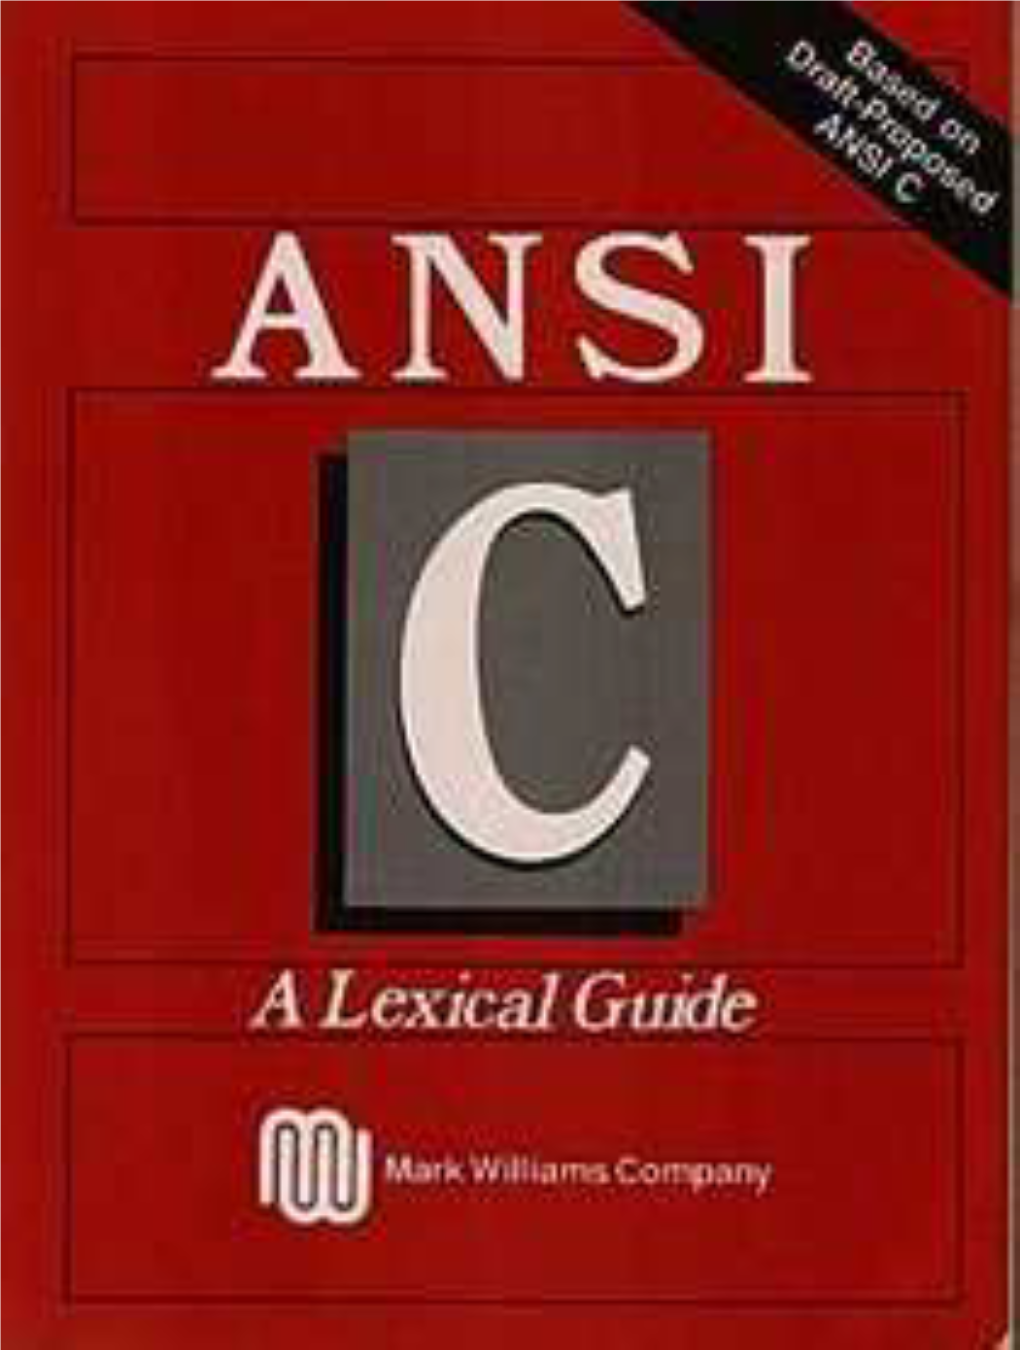 ANSI C: a Lexical Guide Describes the American National Standards Institute (ANSI) Standard for the C Programming Language